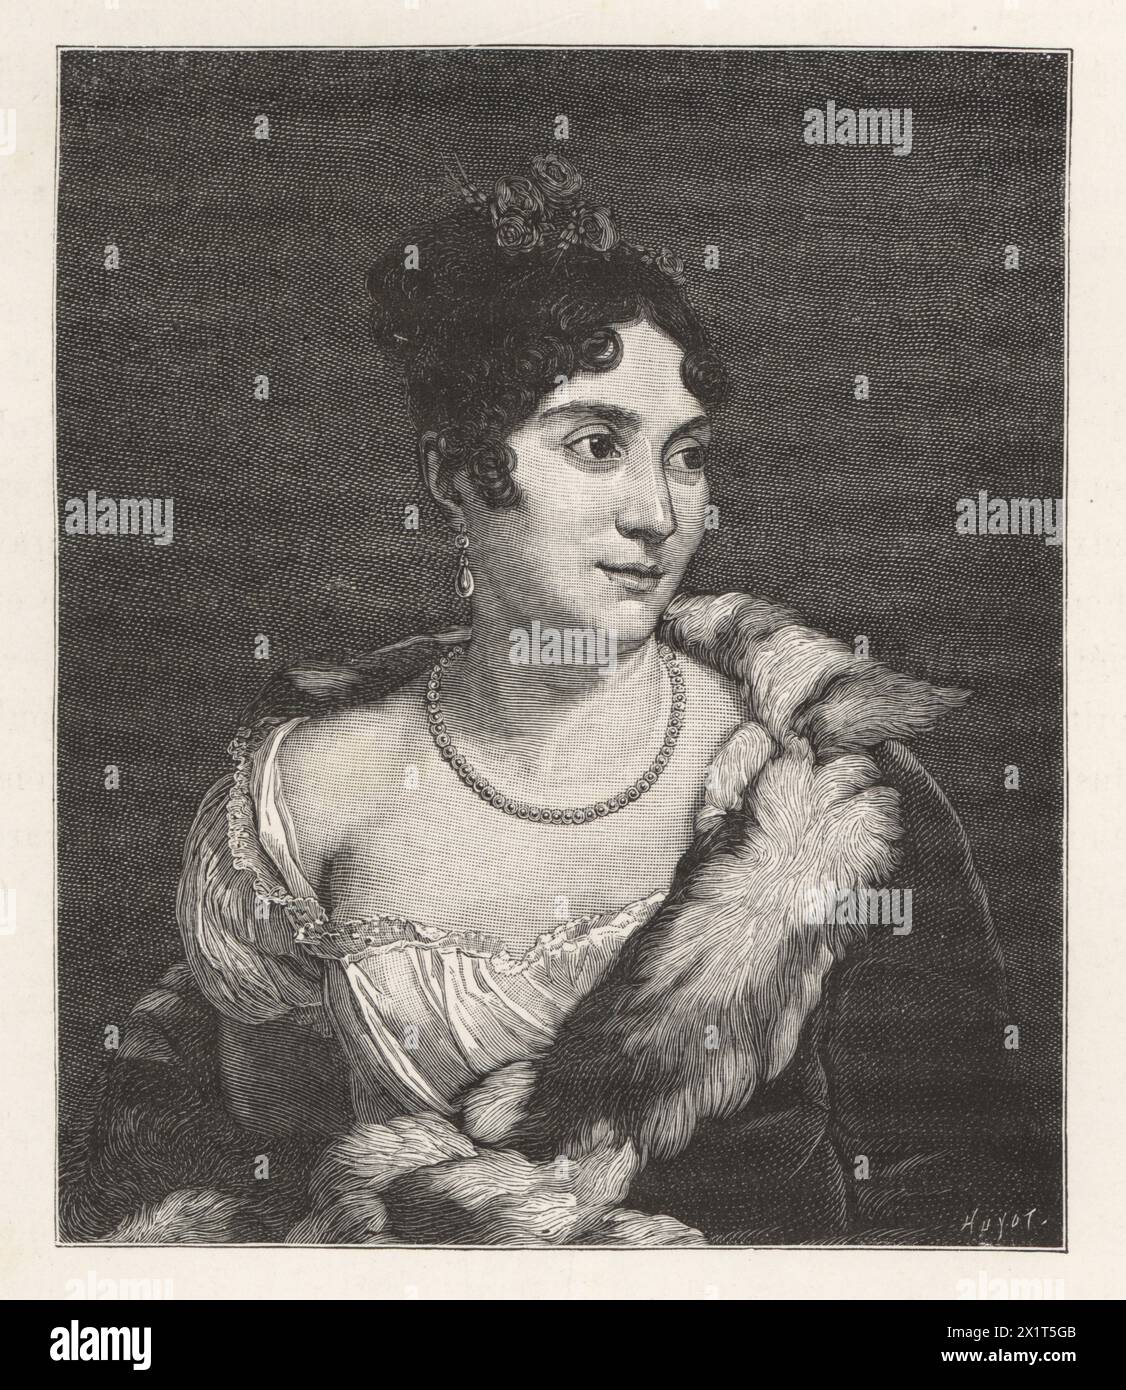 Mademoiselle Mars, pseudonym of Anne-Françoise-Hyppolyte Boutet, French actress and playwright, 1779-1847. Wood engraving by Huyot after a portrait by François Gérard. from Paul Lacroix's Directoire, Consulat et Empire, (Directory, Consulate and Empire), Paris, 1884. Stock Photo